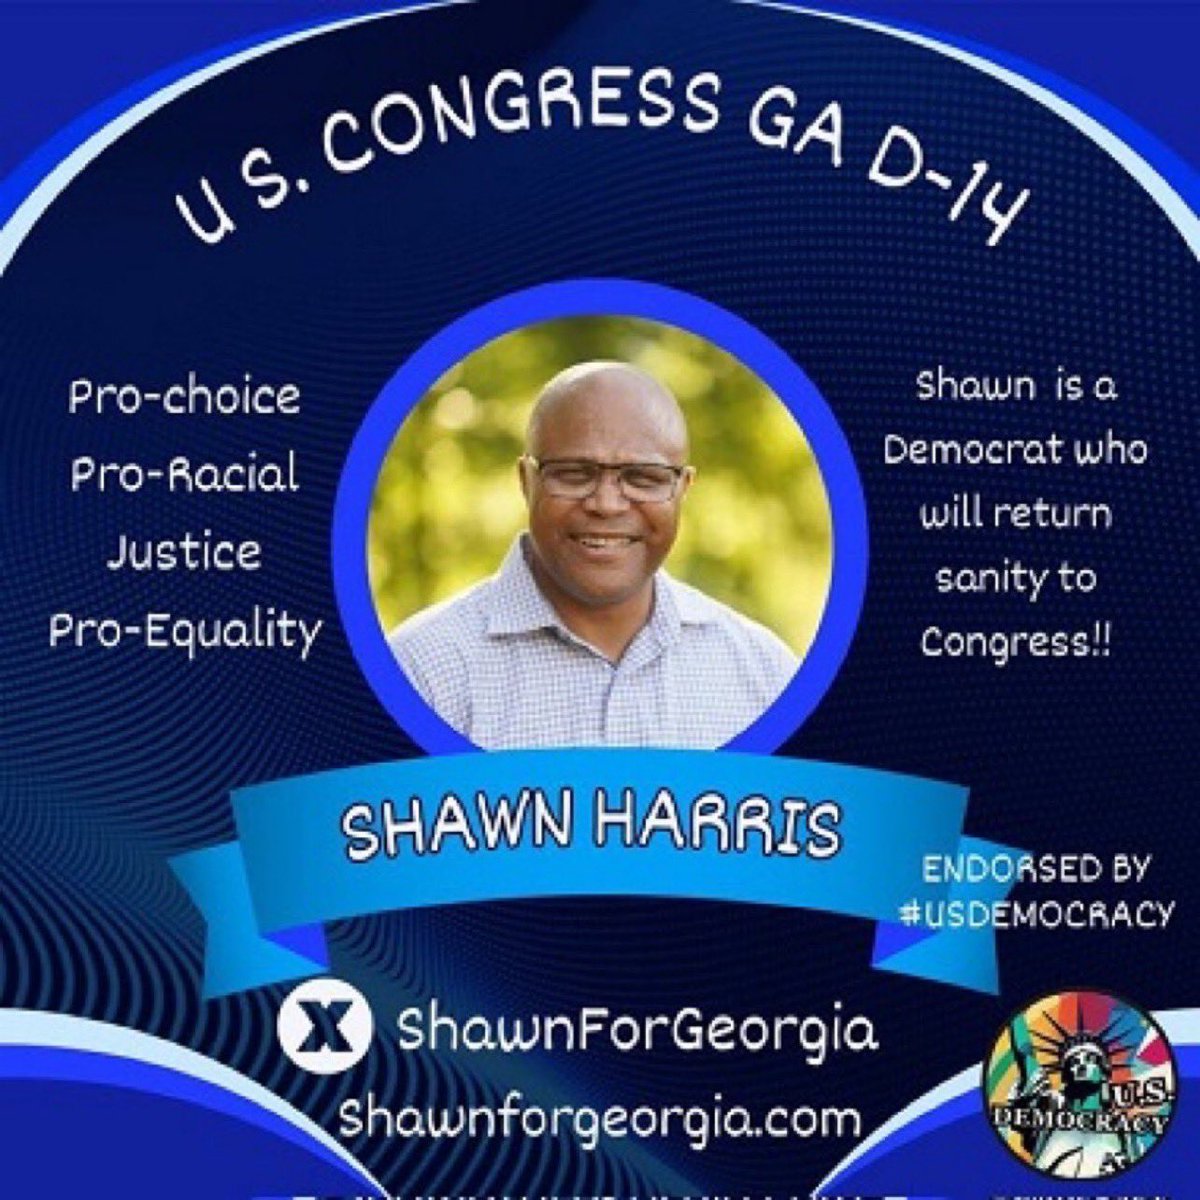 Marjorie Taylor Greene loves attention. She doesn’t love the people in Georgia though. She creates chaos and drama. Clowns belong in the circus, not Congress. Vote for @ShawnForGeorgia You deserve actual representation. Restore dignity to Georgia. #DemVoice1 #wtpGOTV24